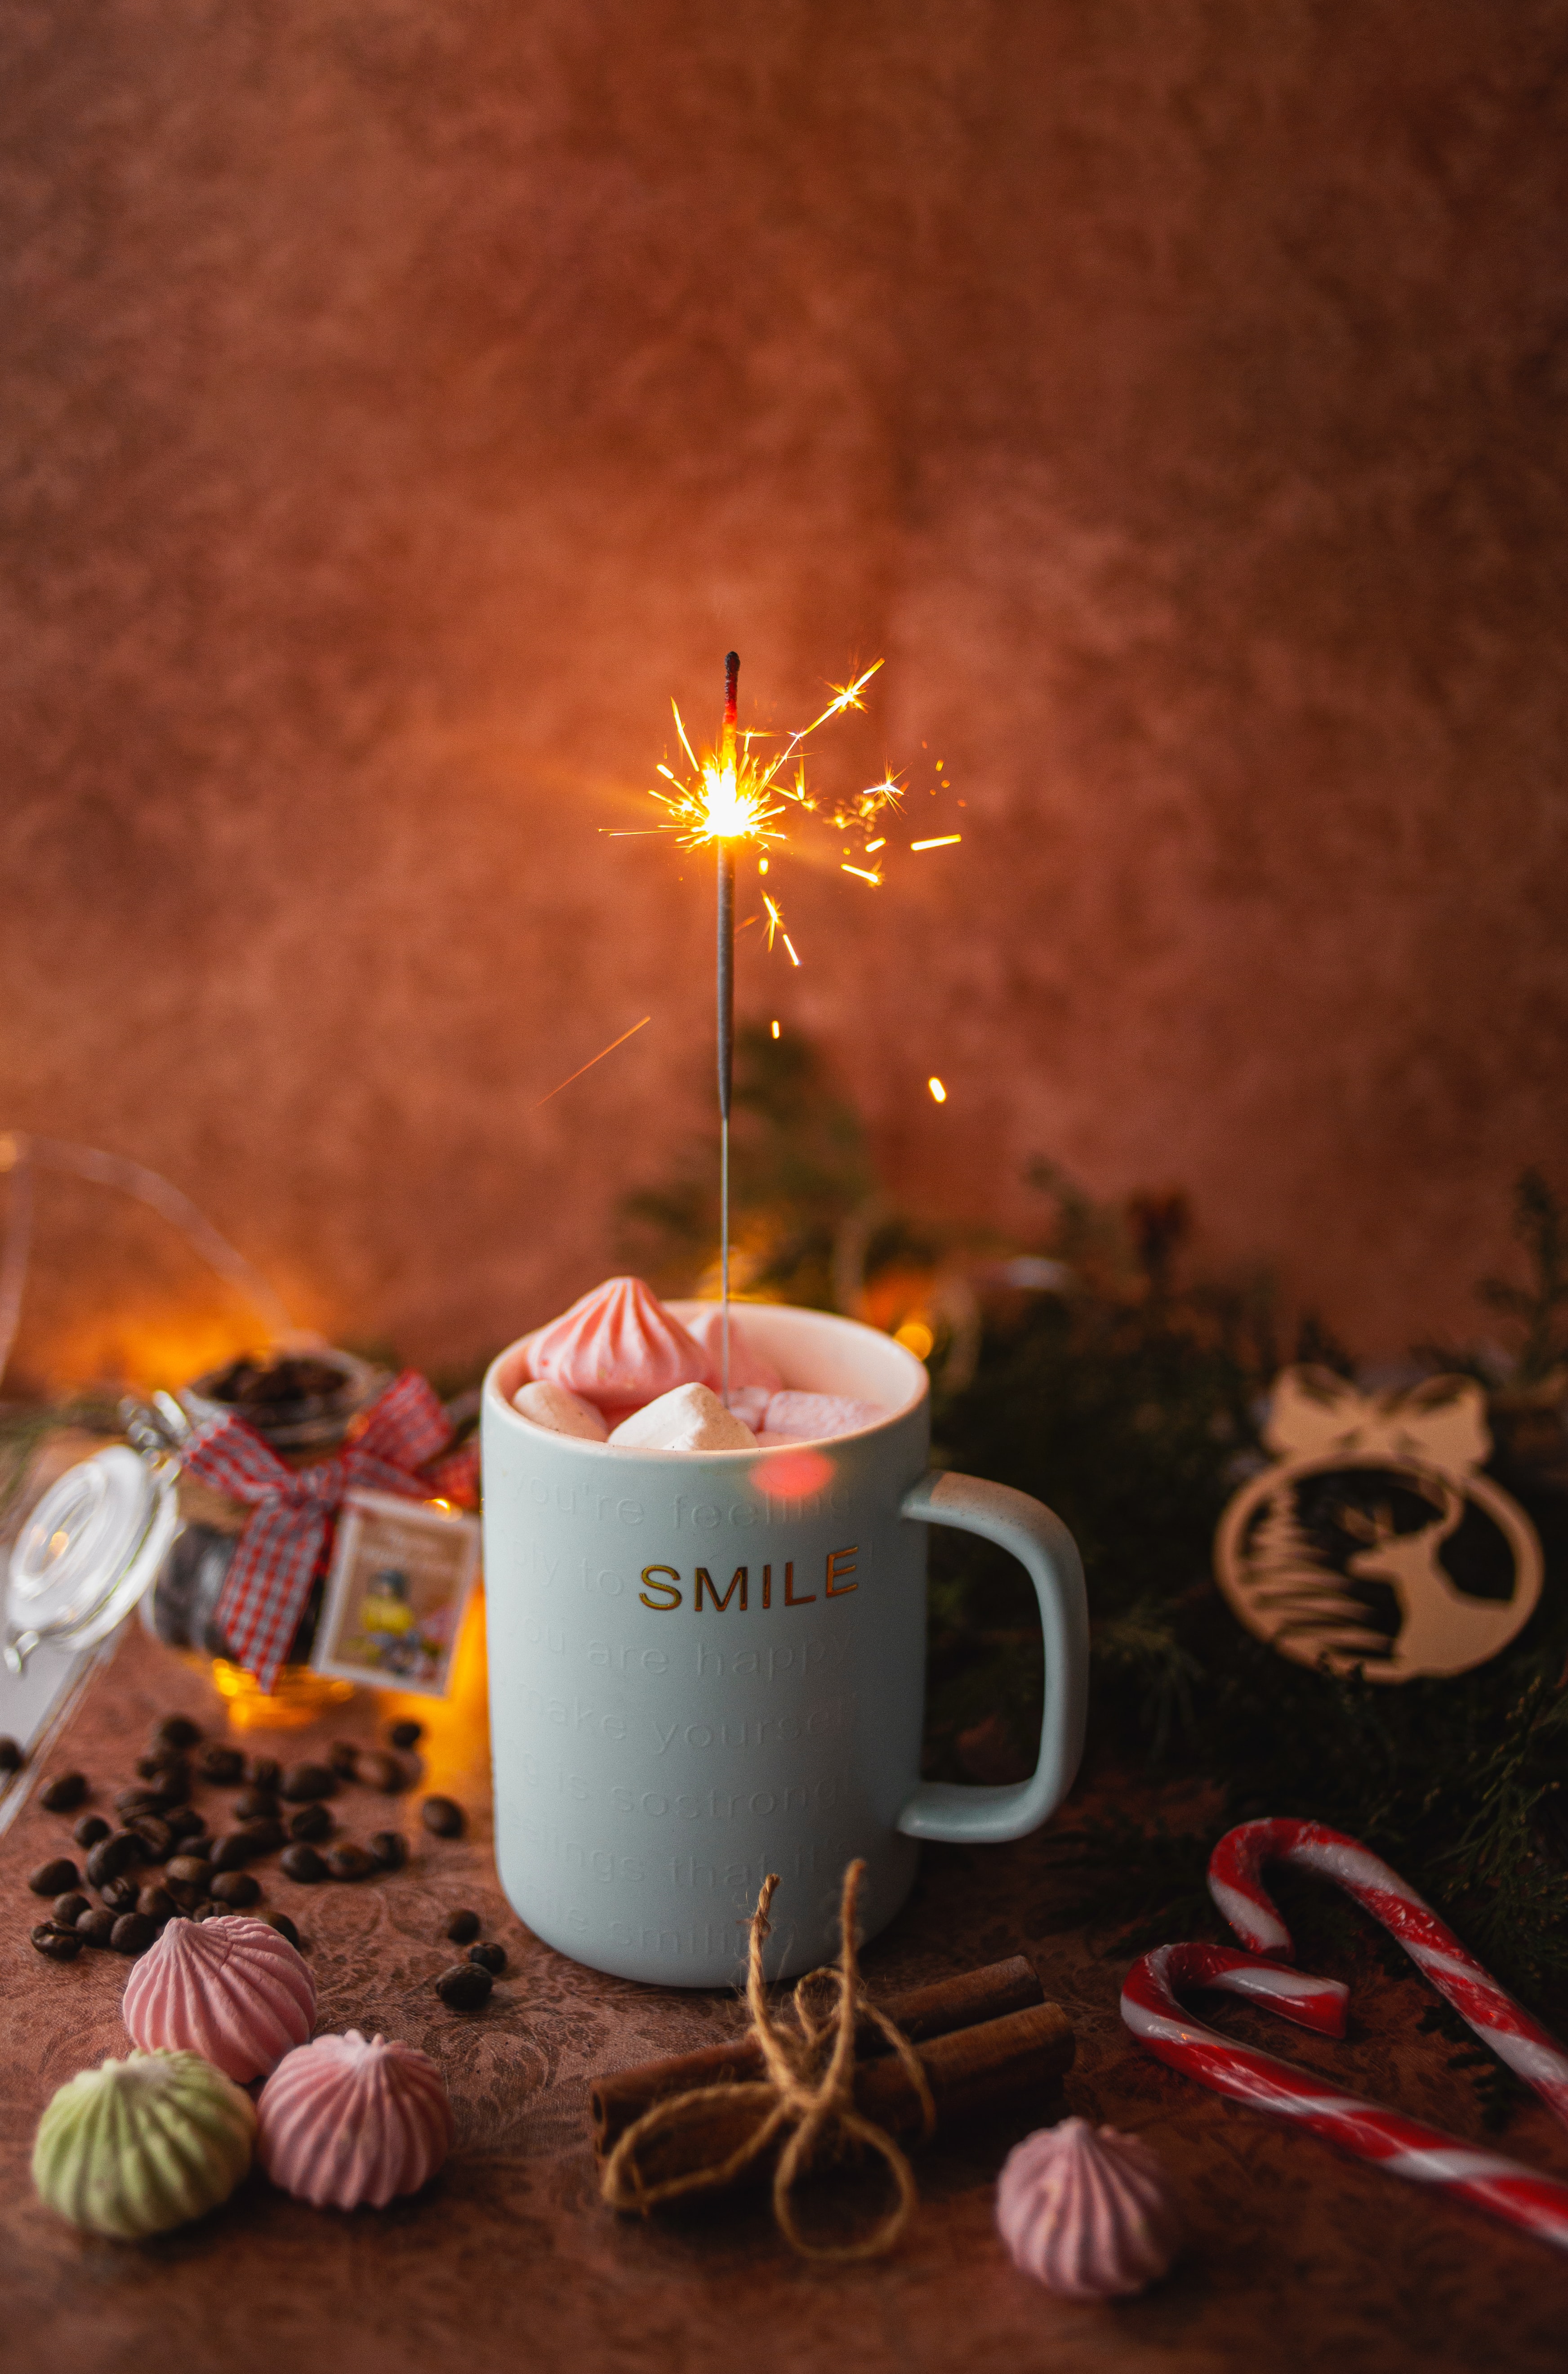 miscellanea, mug, holiday, sparks, cup, miscellaneous, marshmallow, bengal lights, sparklers, zephyr cellphone